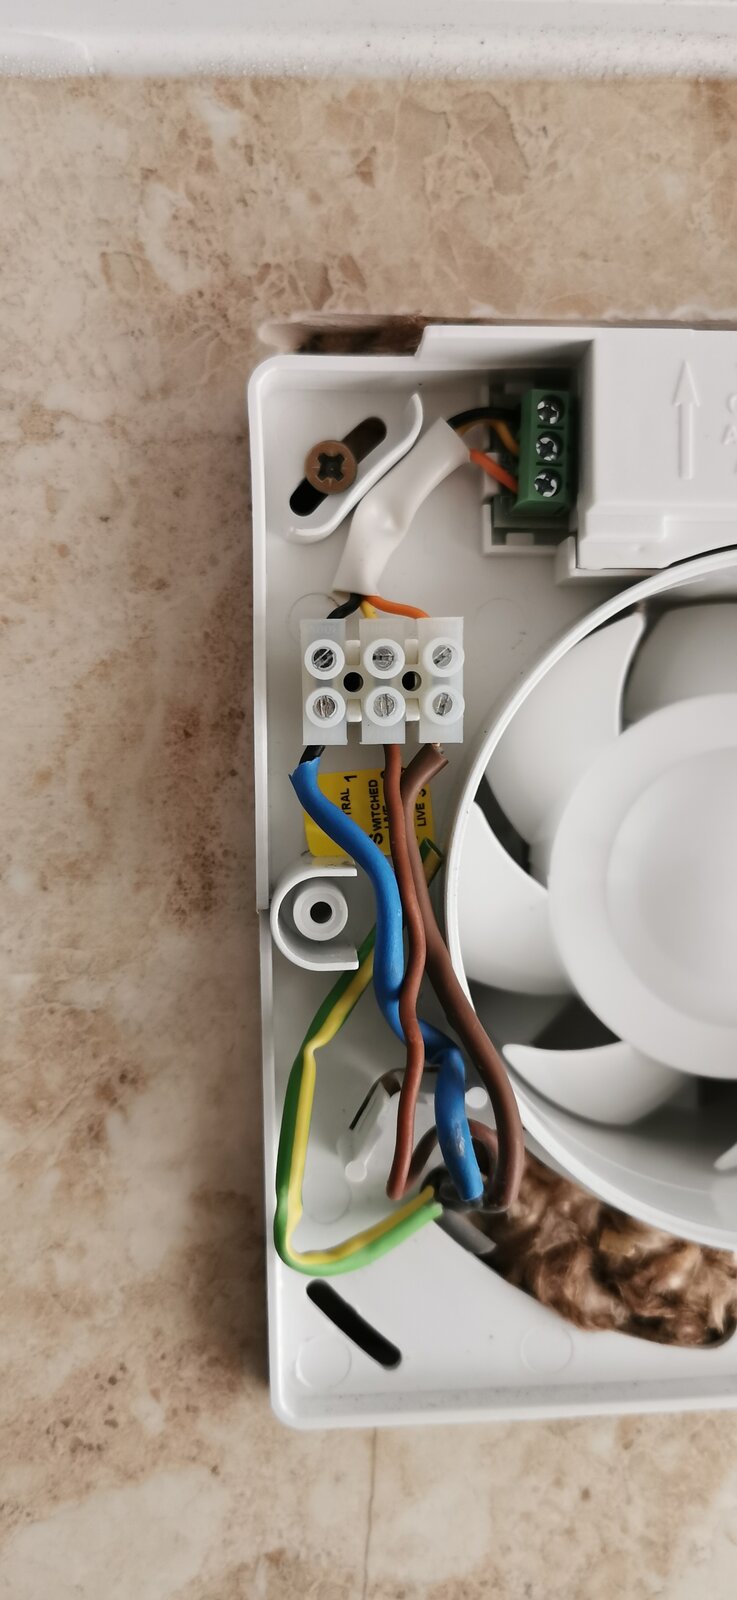 Bathroom extractor timer not working | DIYnot Forums